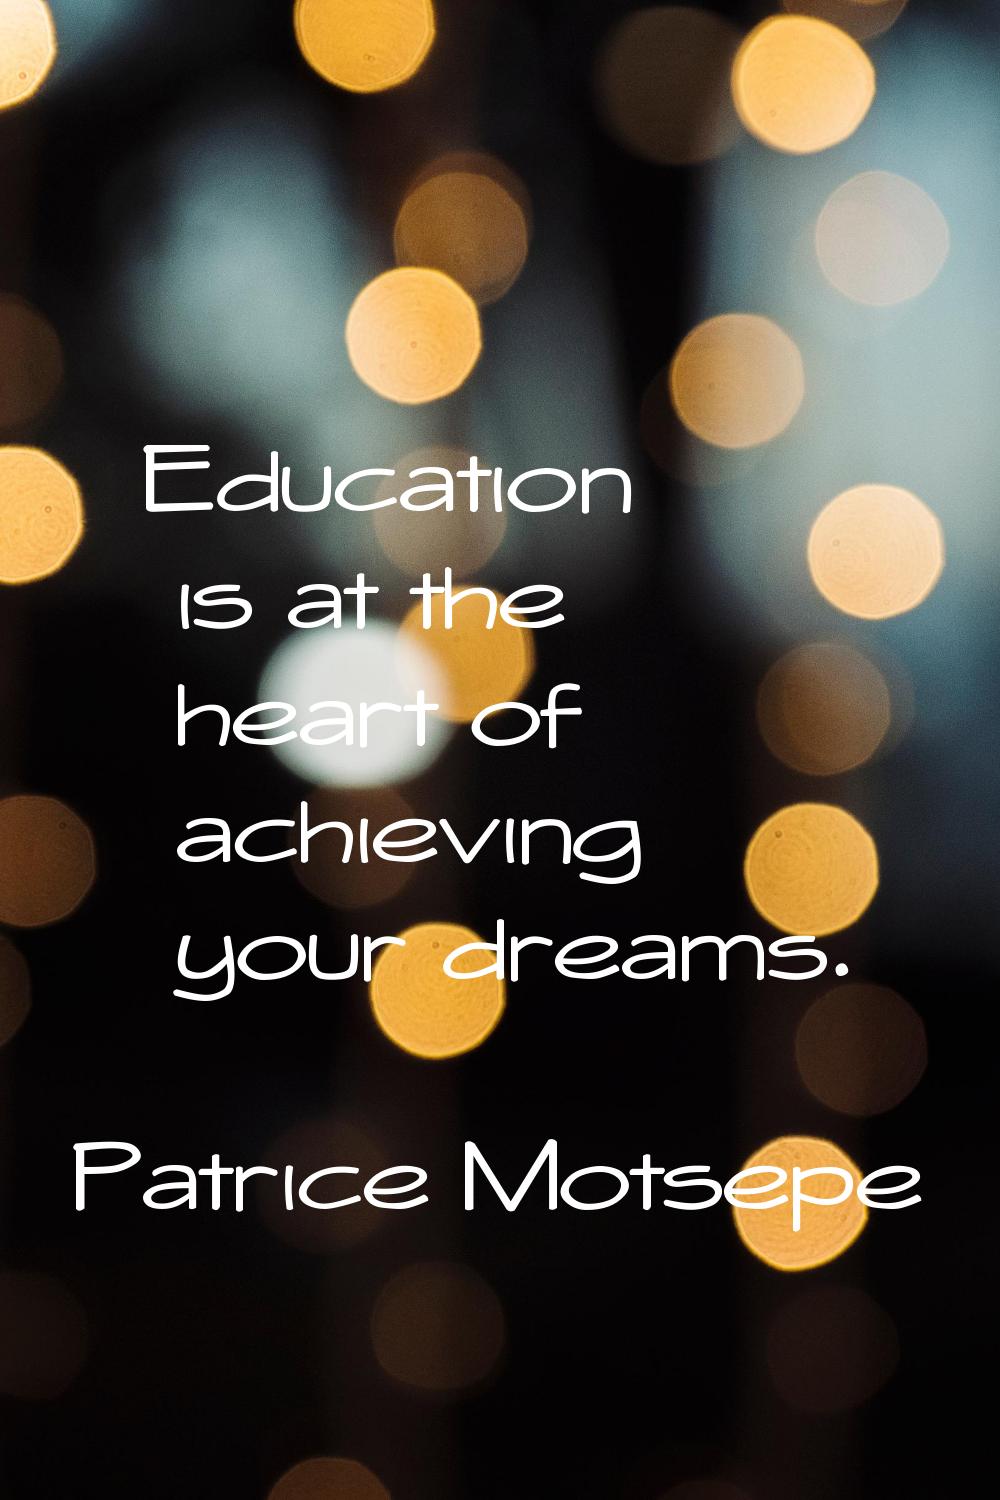 Education is at the heart of achieving your dreams.